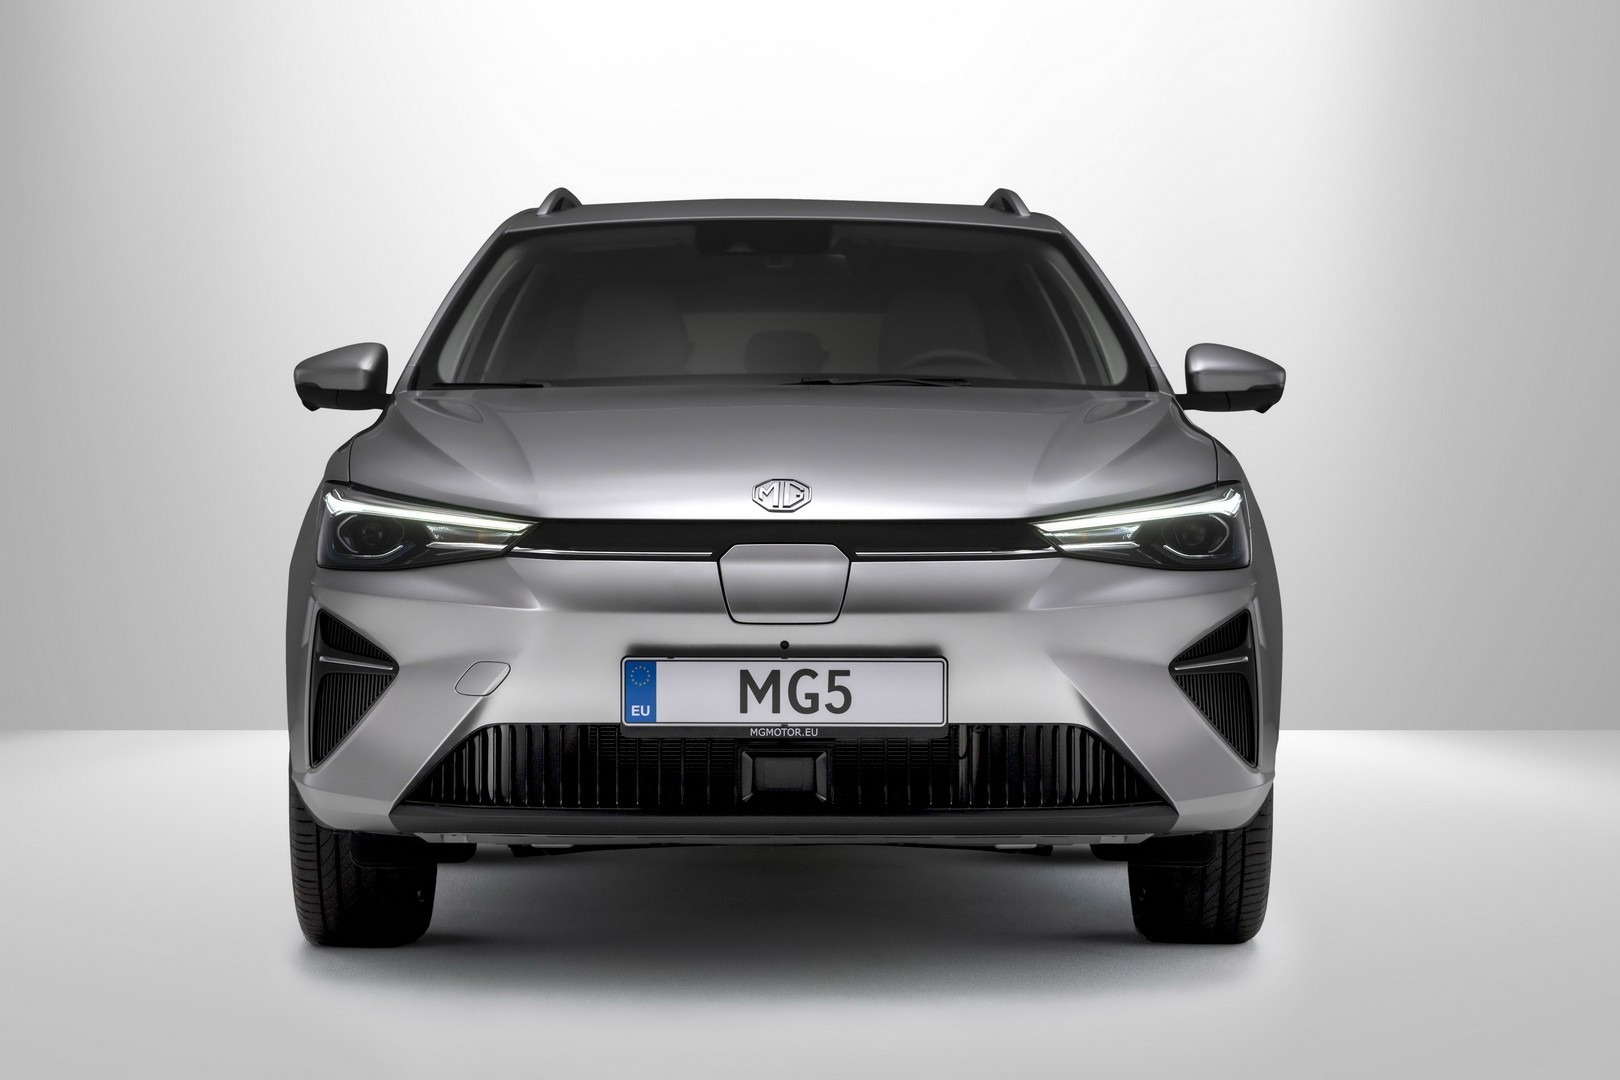 2022-mg5-ev-starting-price-announced-it-s-pretty-well-equipped_5.jpg (1620×1080)